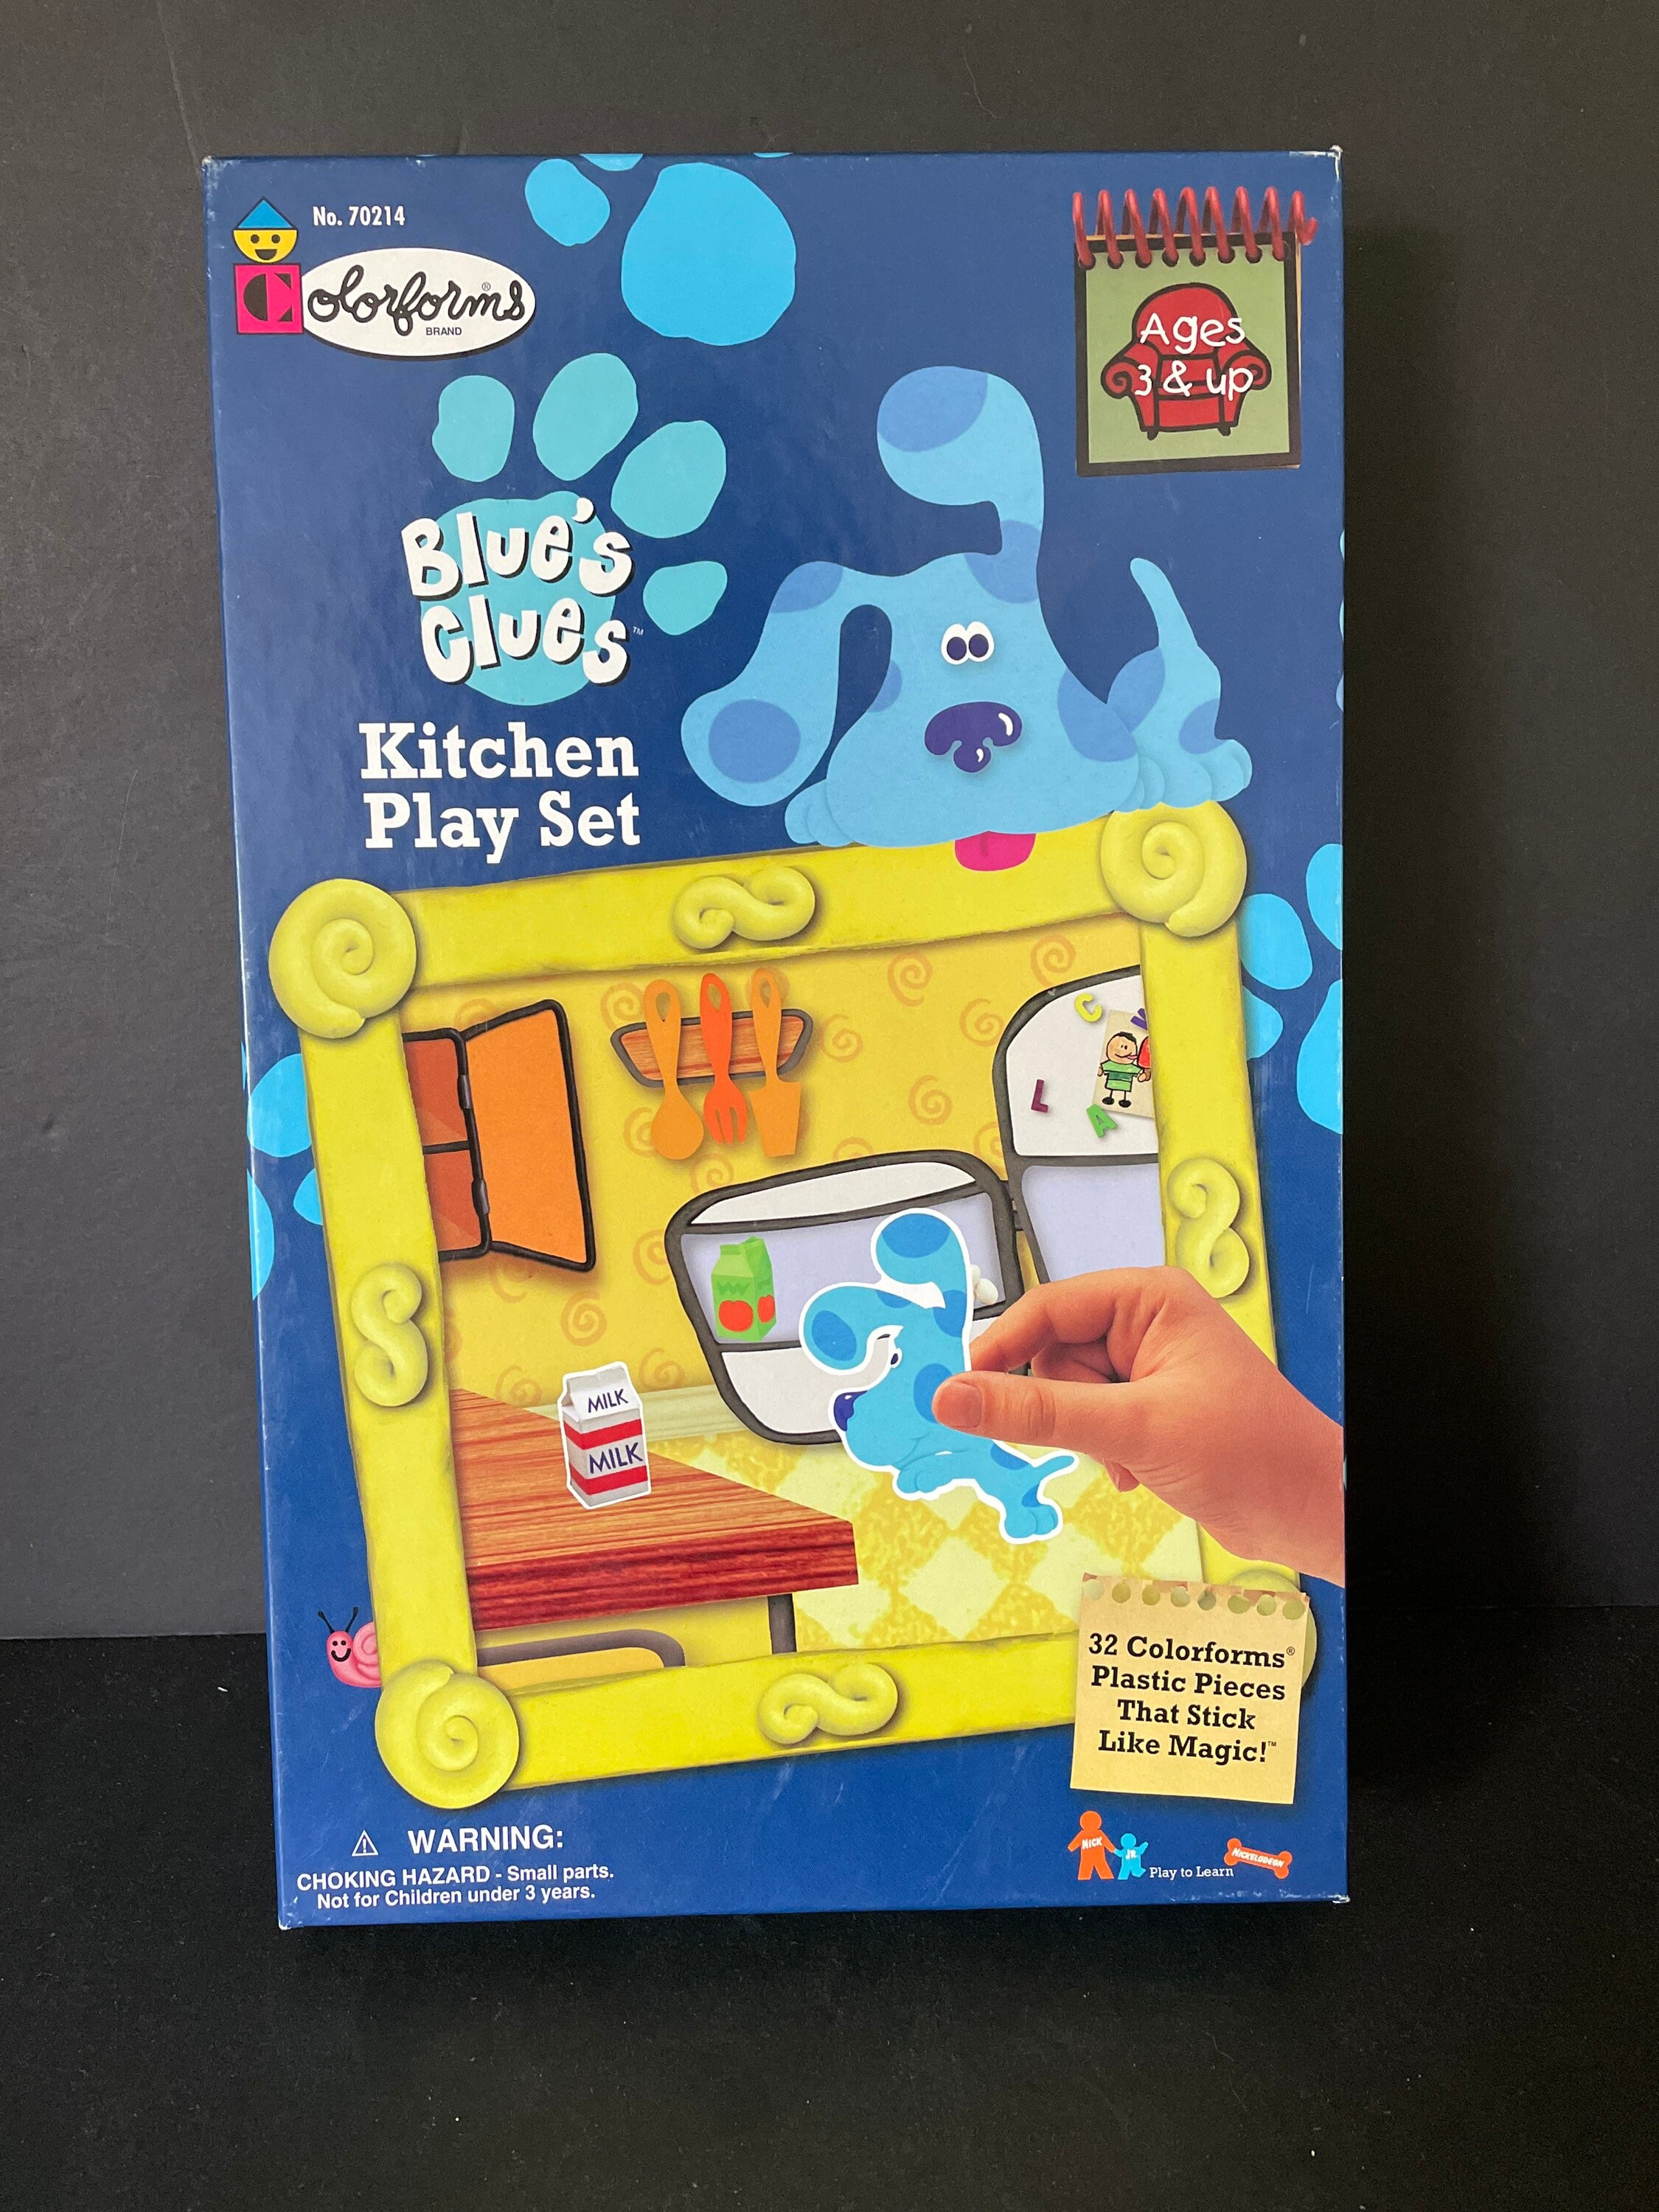 Colorforms Trouble Game Set -It's More Fun To Play The Colorform Way!